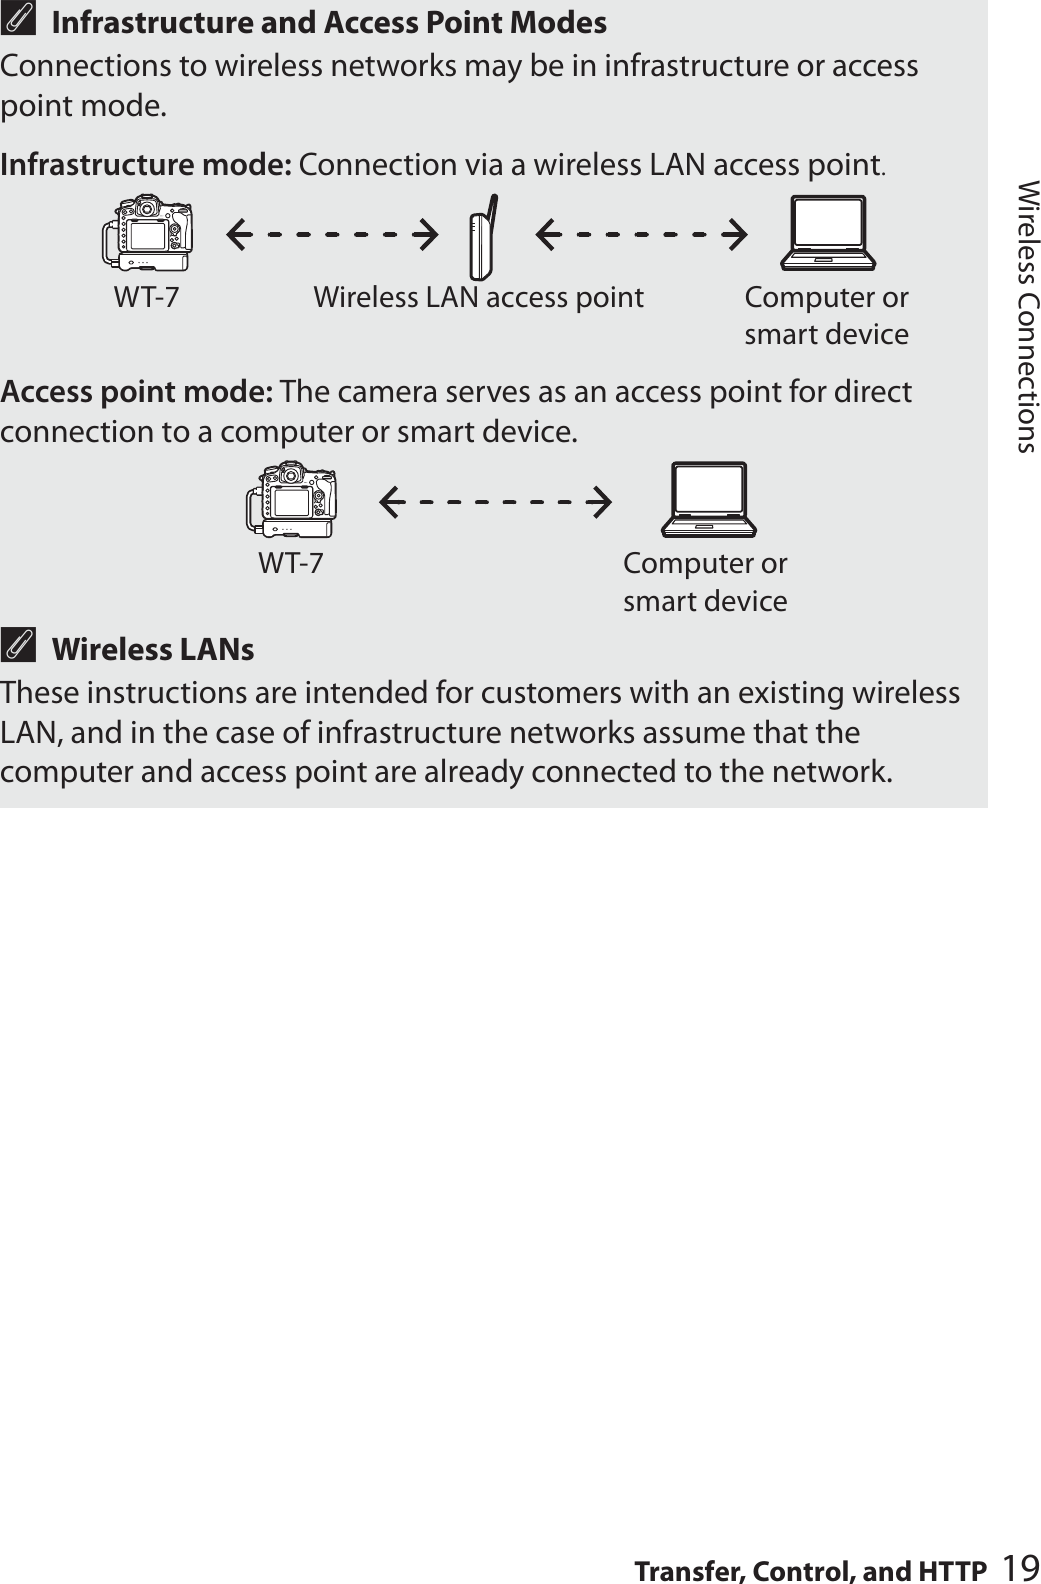 19Transfer, Control, and HTTPWireless ConnectionsAInfrastructure and Access Point ModesConnections to wireless networks may be in infrastructure or access point mode.Infrastructure mode: Connection via a wireless LAN access point.Access point mode: The camera serves as an access point for direct connection to a computer or smart device.AWireless LANsThese instructions are intended for customers with an existing wireless LAN, and in the case of infrastructure networks assume that the computer and access point are already connected to the network.WT-7 Wireless LAN access point Computer or smart deviceWT-7 Computer or smart device